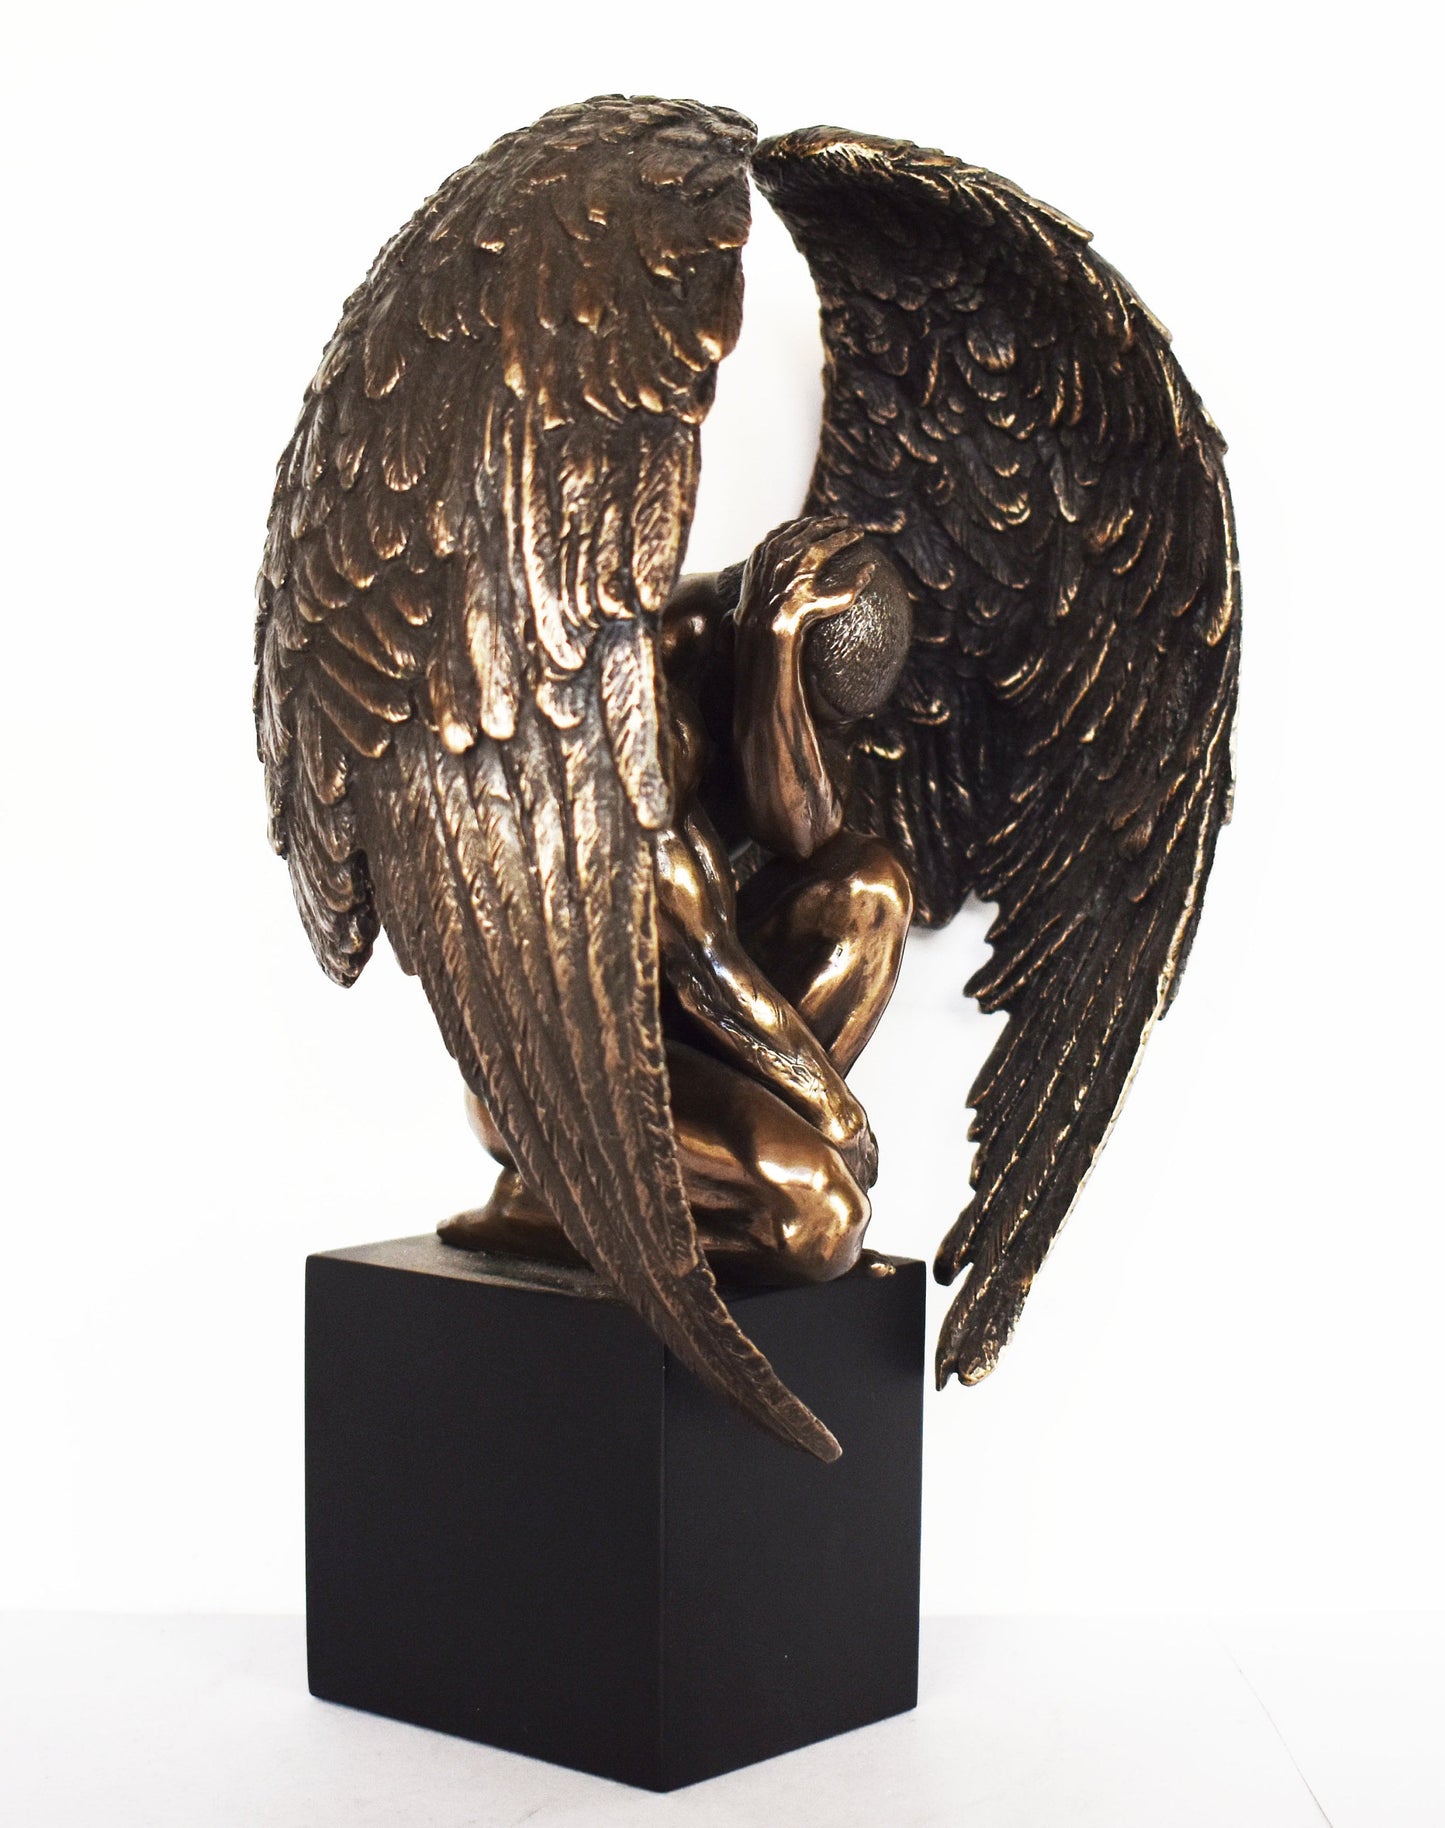 Fallen Angel - Cast Out of Heaven or Sinned - Tempt Humans to Lawlessness - Cold Cast Bronze Resin